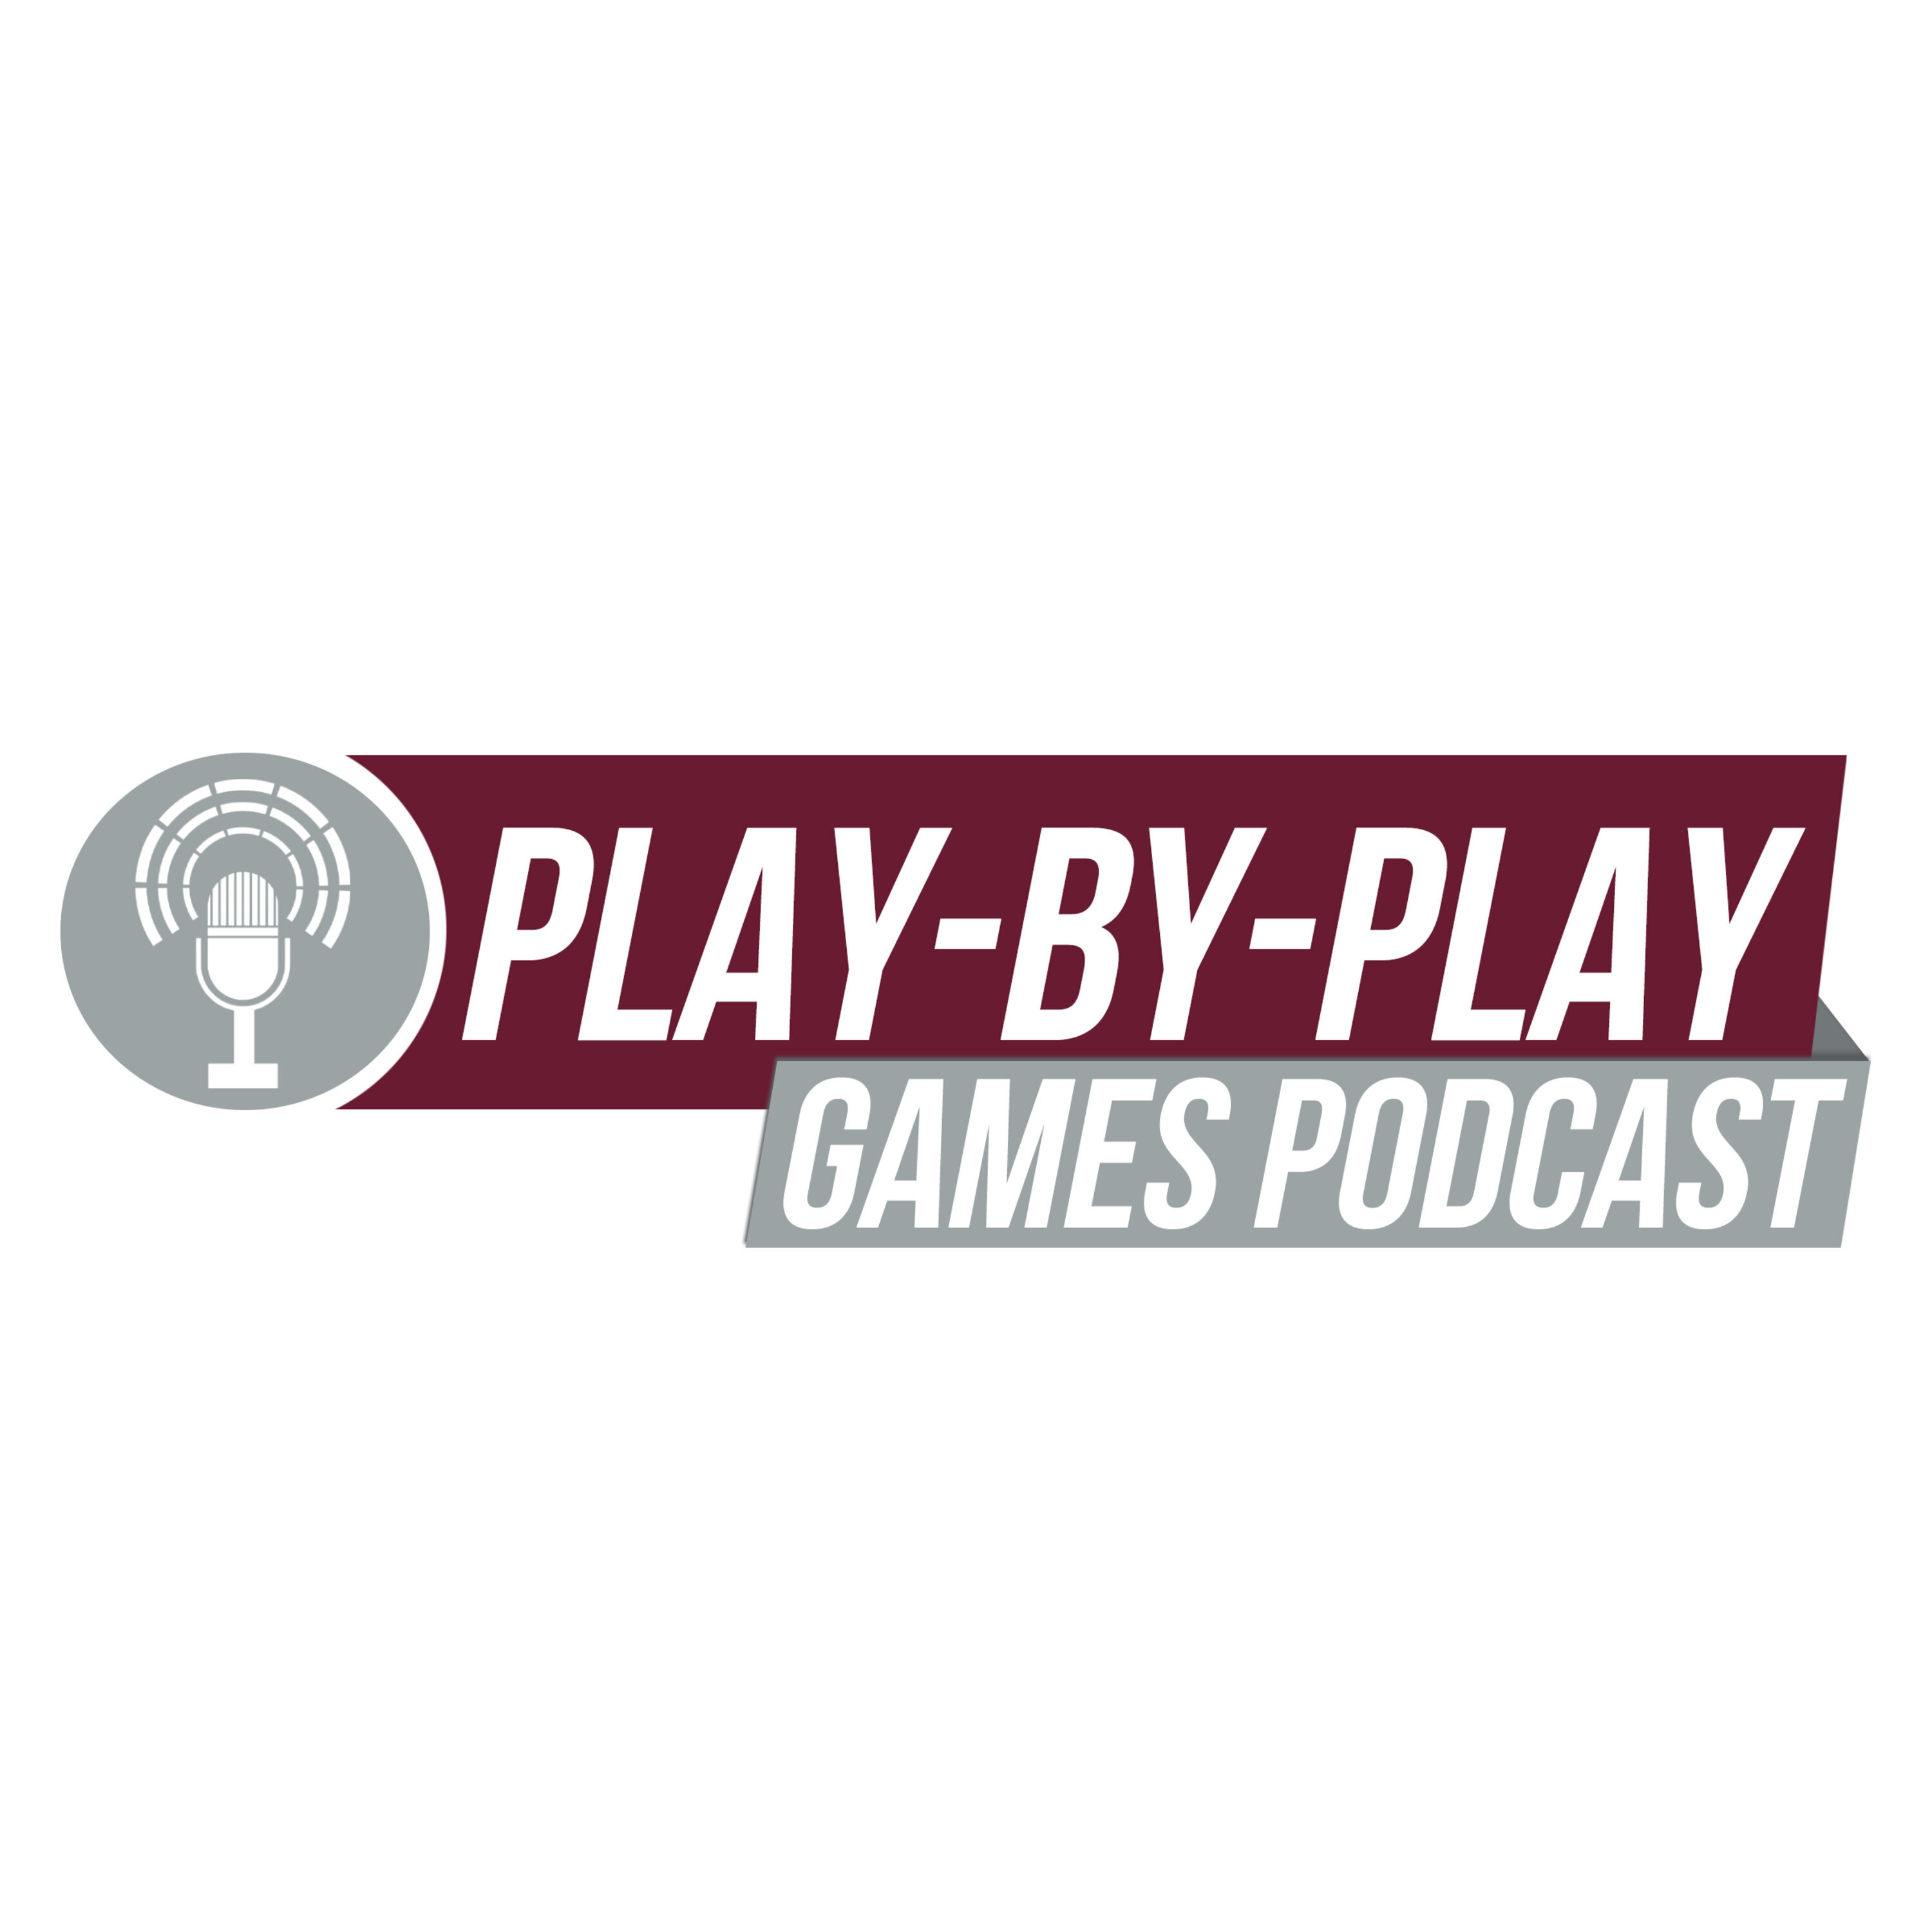 Play-by-Play Games